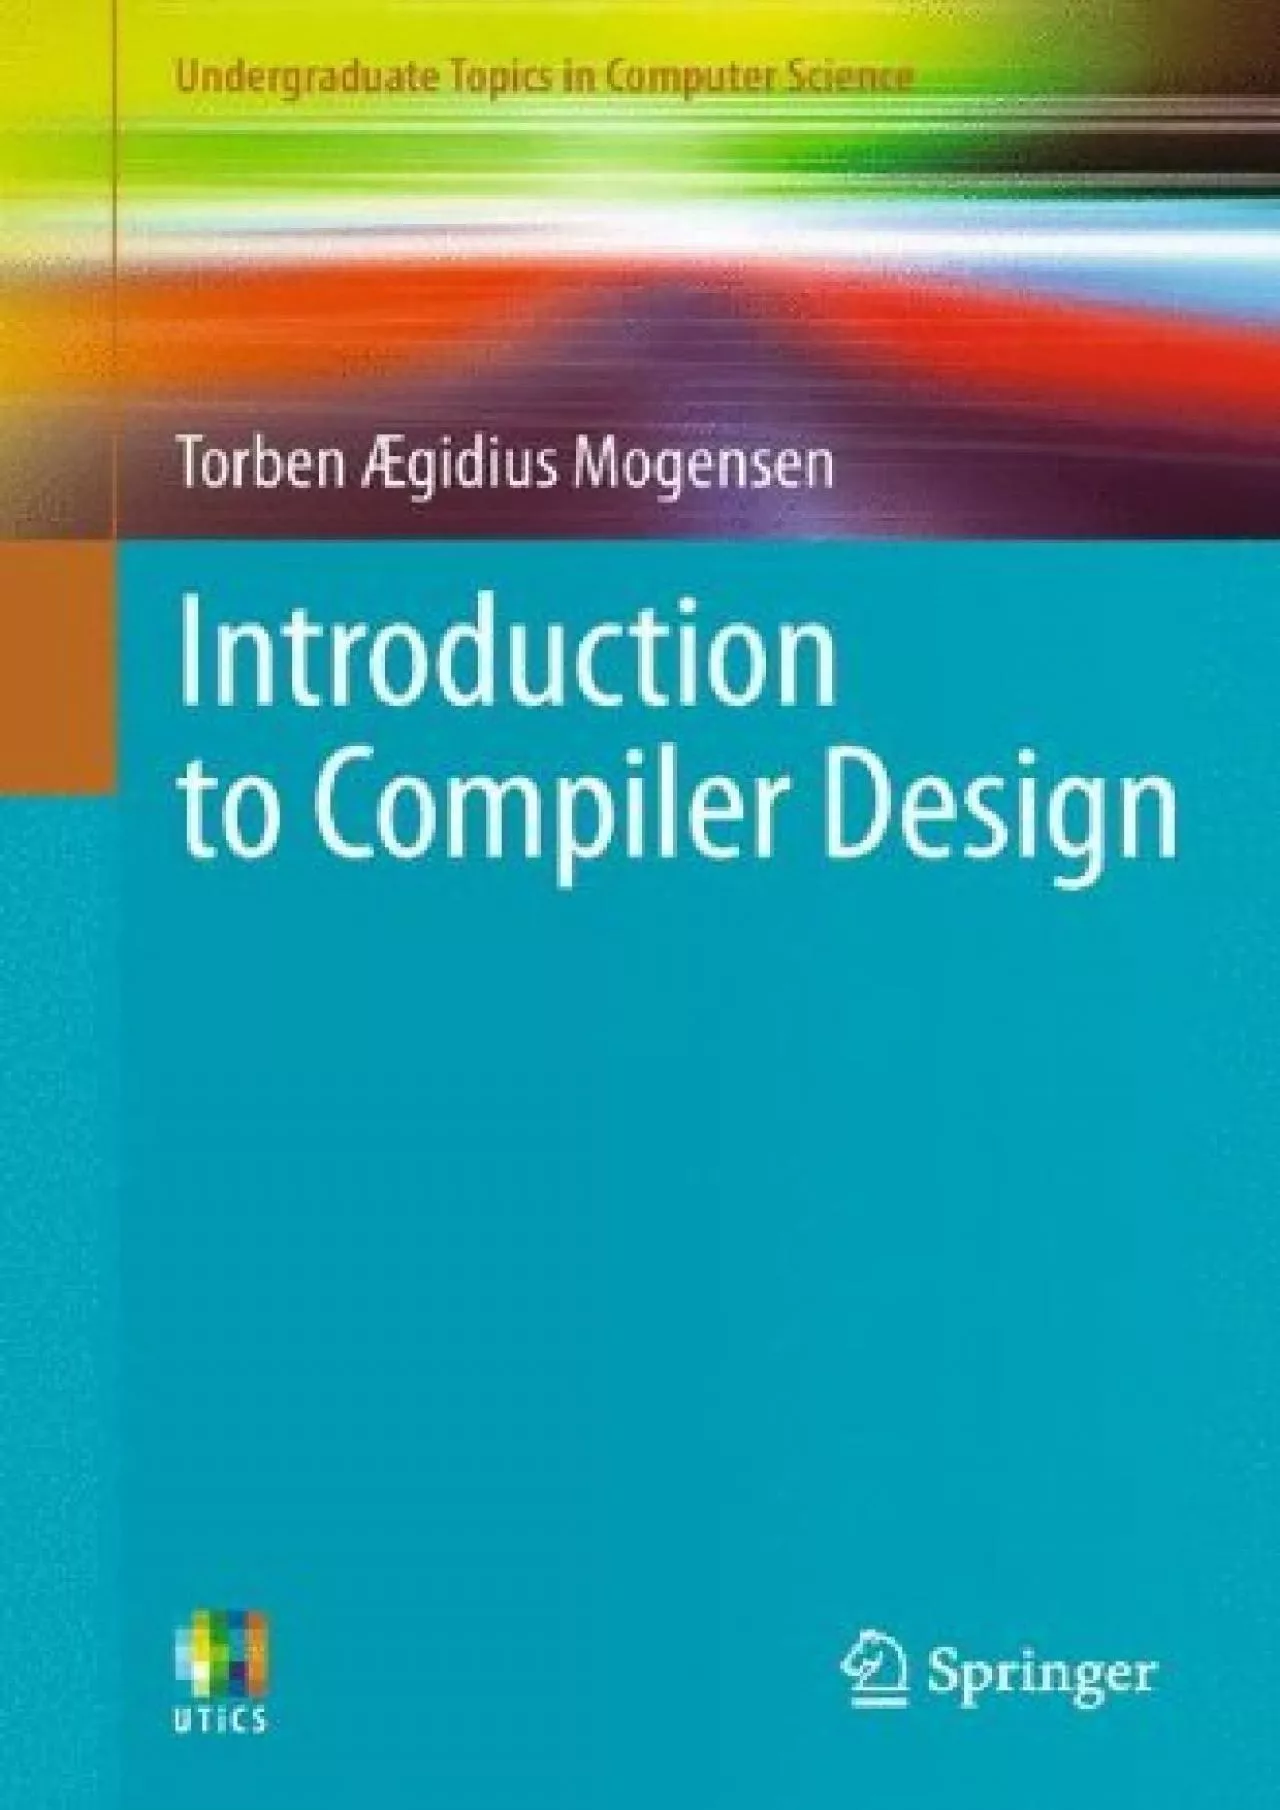 [DOWLOAD]-Introduction to Compiler Design (Undergraduate Topics in Computer Science)